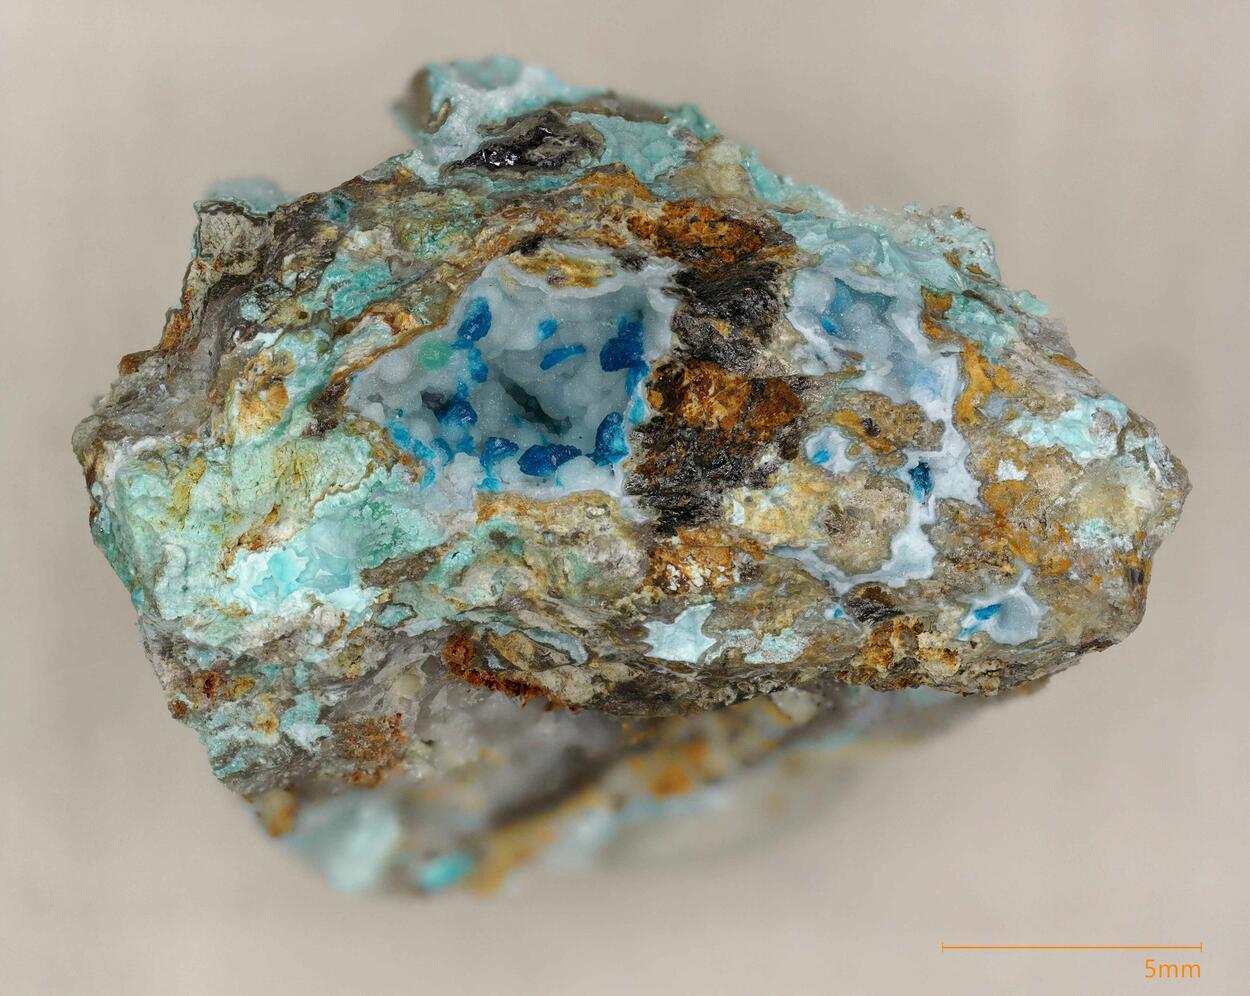 Dongchuanite